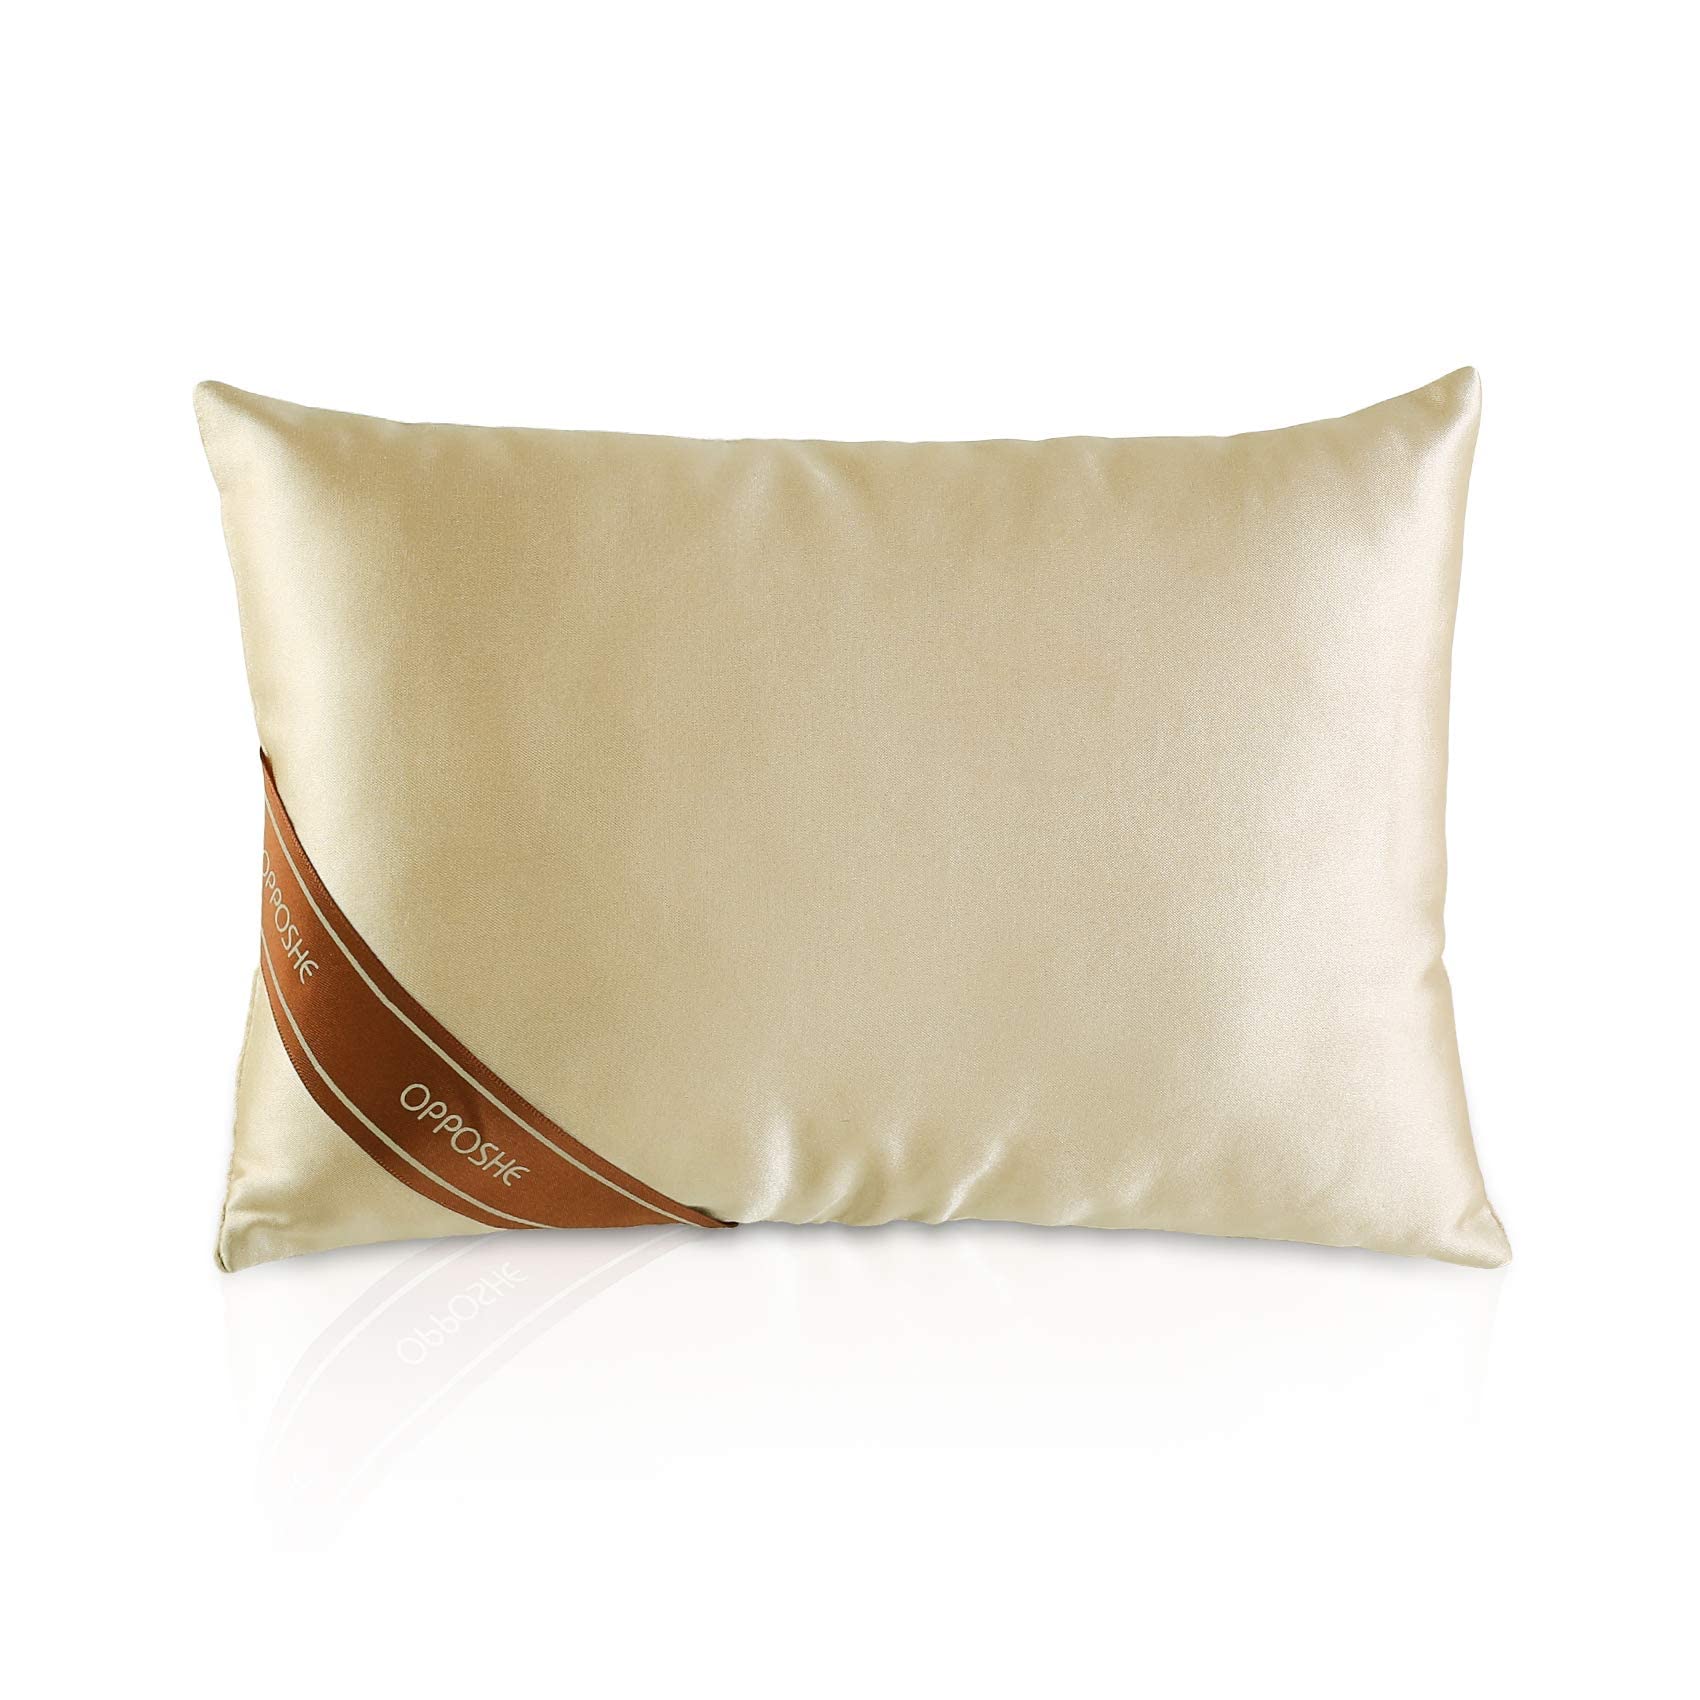  Satin Pillow Luxury Bag Shaper Compatible for the Designer Bag  Graceful PM and MM : Handmade Products